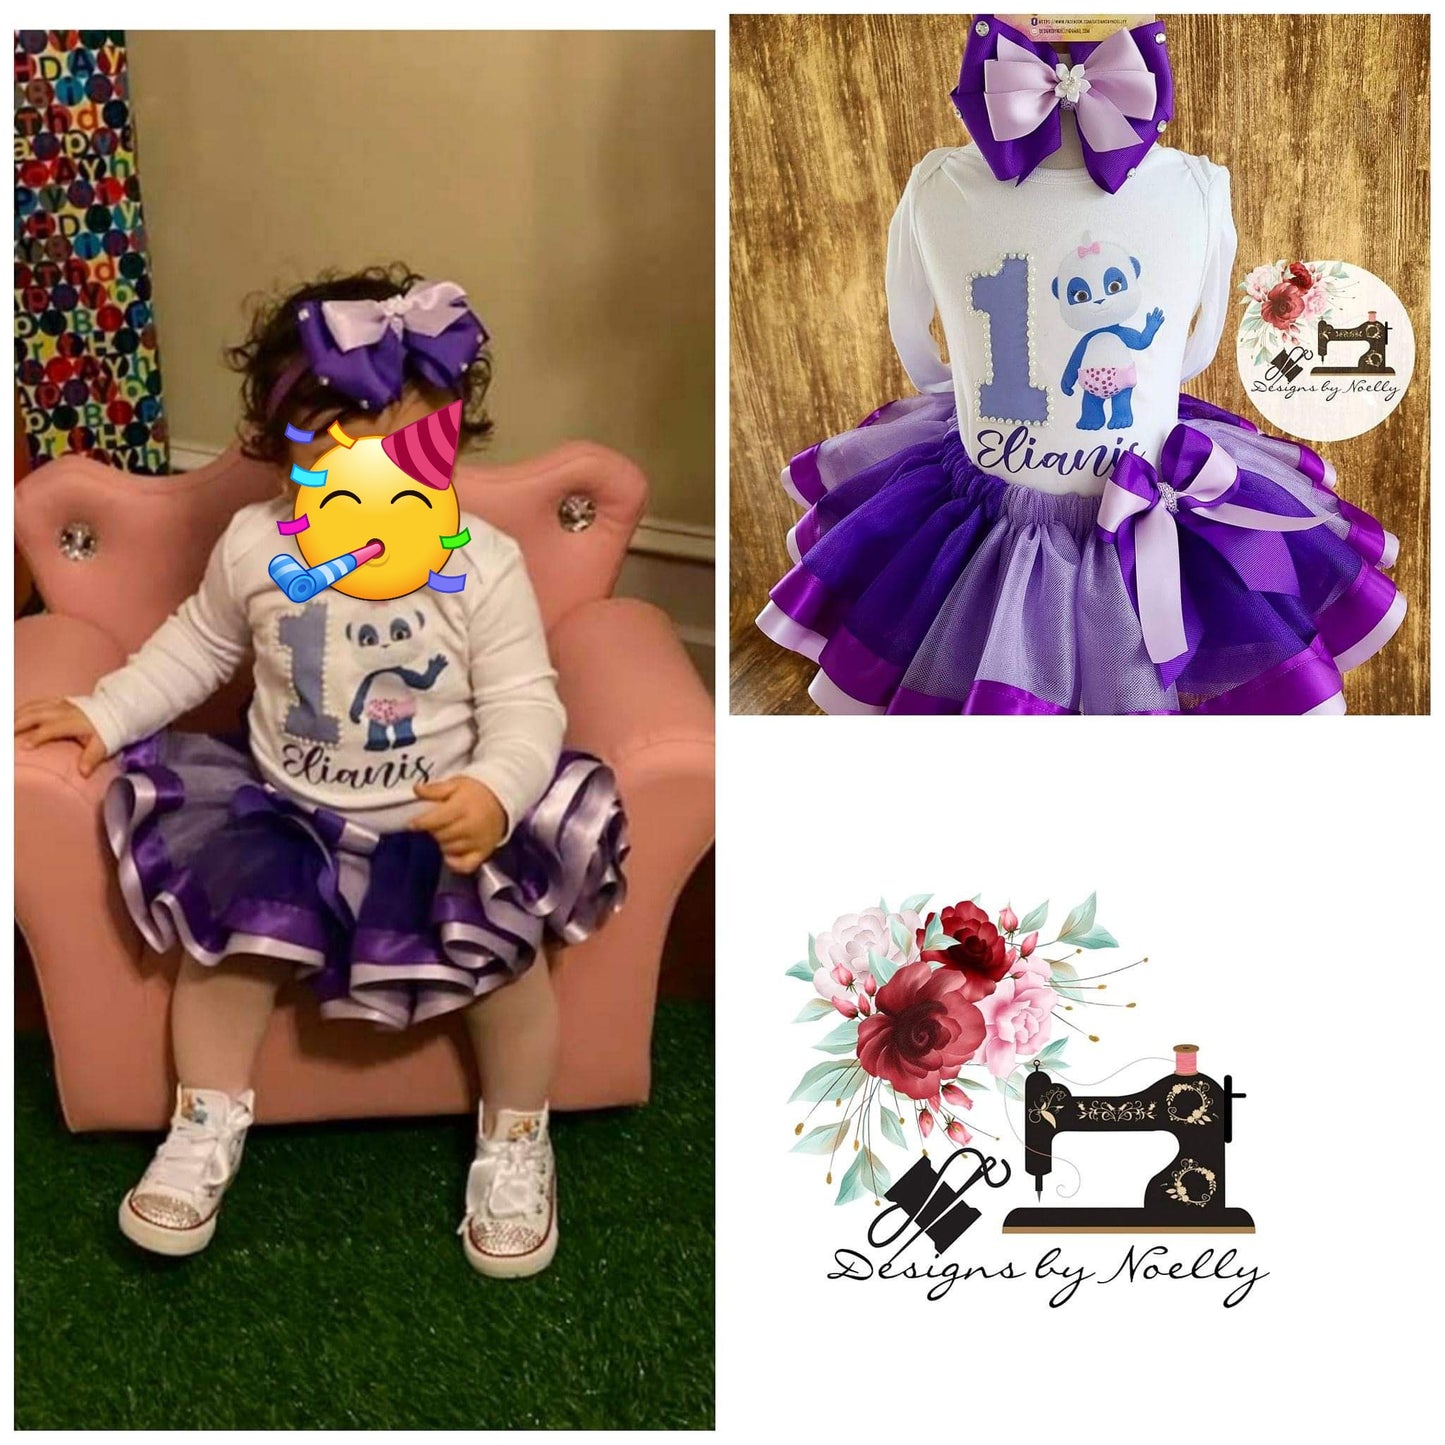 Word Party Lulu Girl Tutu Outfit Purple and Lavender